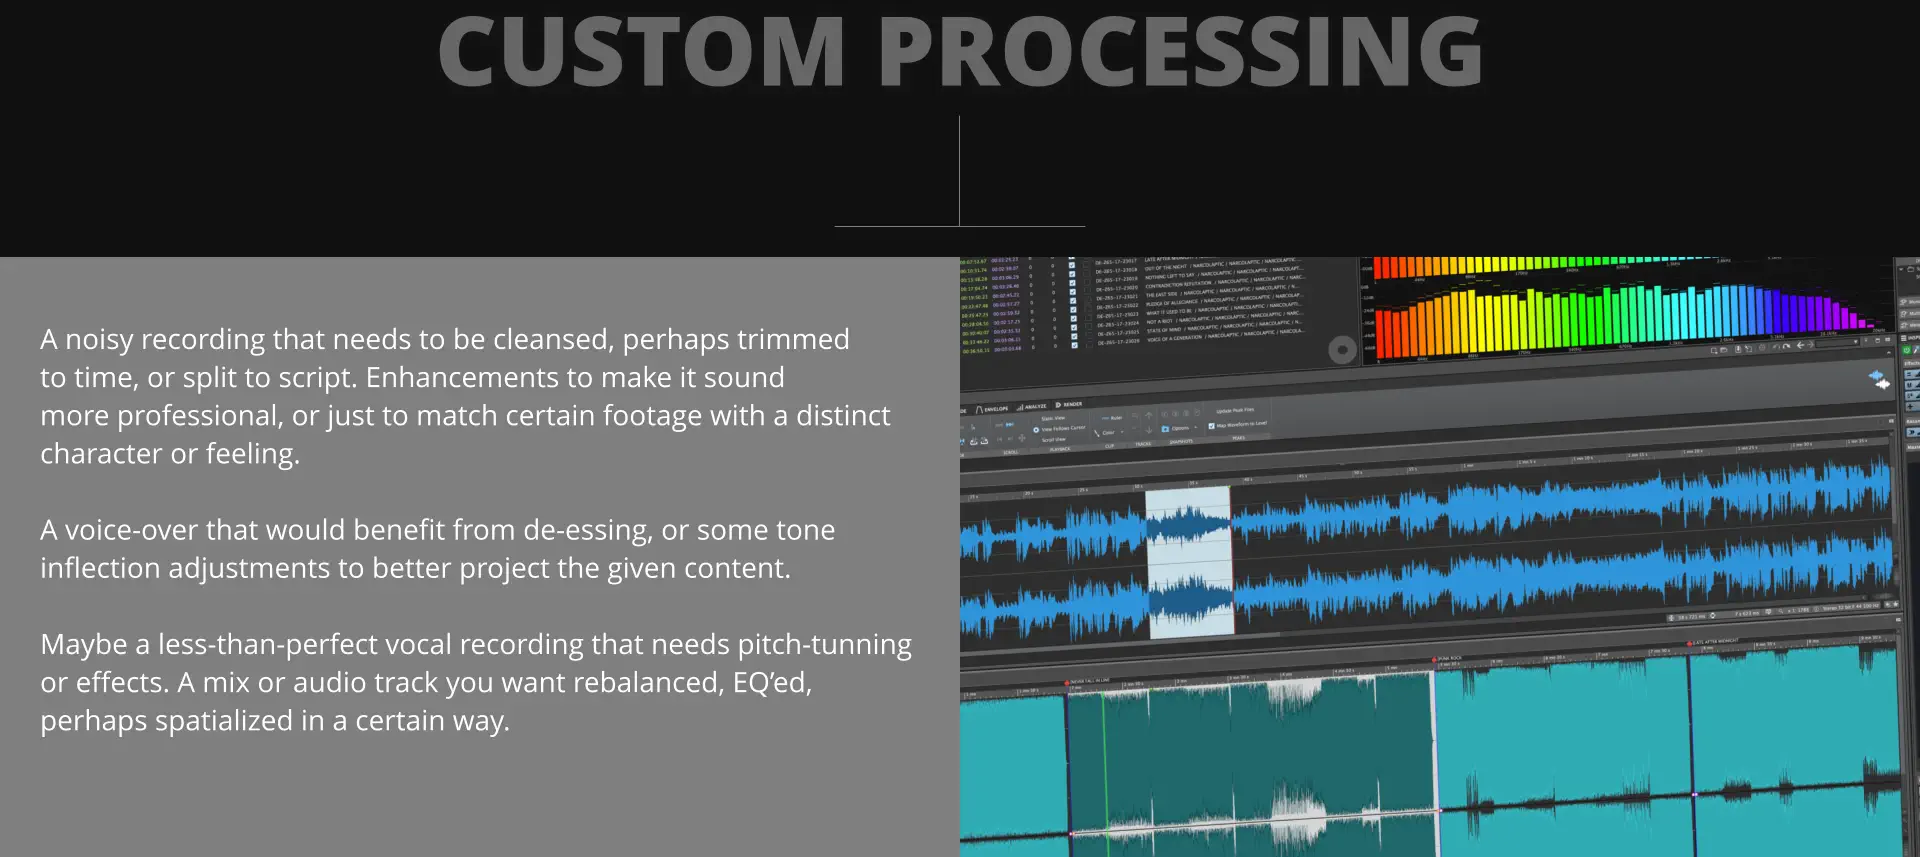 CUSTOM PROCESSING A noisy recording that needs to be cleansed, perhaps trimmed to time, or split to script. Enhancements to make it sound more professional, or just to match certain footage with a distinct character or feeling.   A voice-over that would benefit from de-essing, or some tone inflection adjustments to better project the given content.  Maybe a less-than-perfect vocal recording that needs pitch-tunning or effects. A mix or audio track you want rebalanced, EQ’ed,  perhaps spatialized in a certain way.